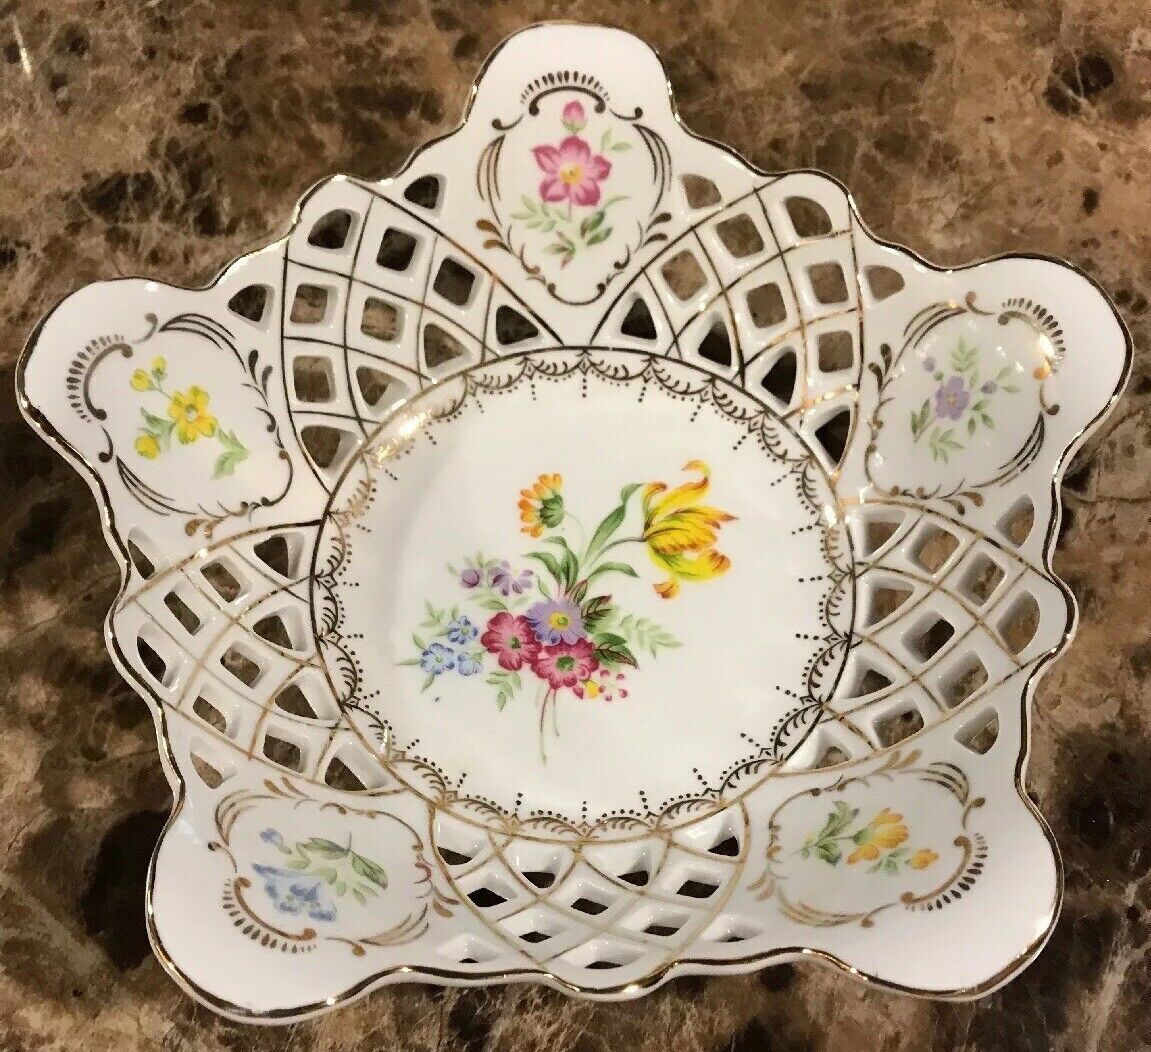 Vintage Porcelain Reticulated Bowl Dish Florals Gold accents White China unmarkd